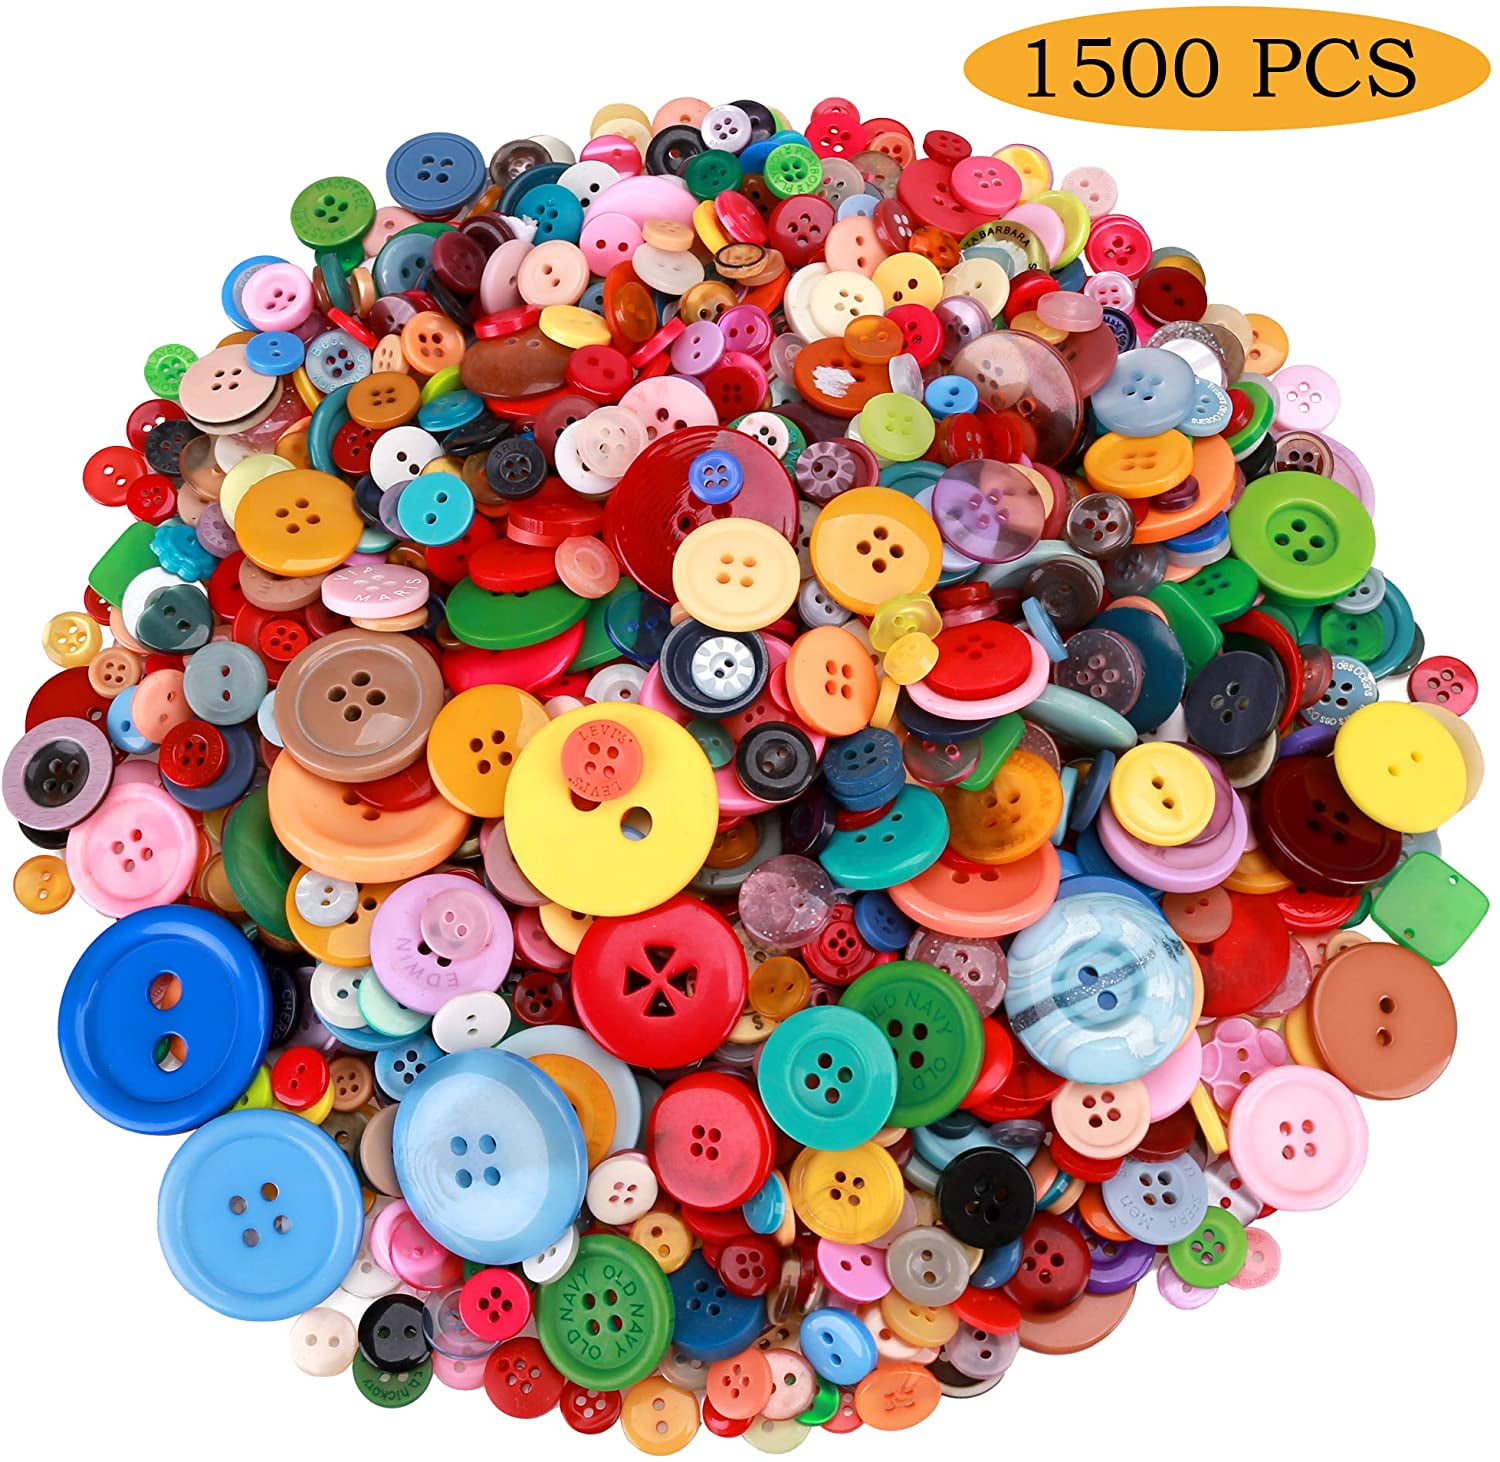 Haawooky 500-700 Pcs Assorted Mixed Color Resin Buttons 2 and 4 Holes Round Craft for Sewing DIY Crafts Children's Manual Button